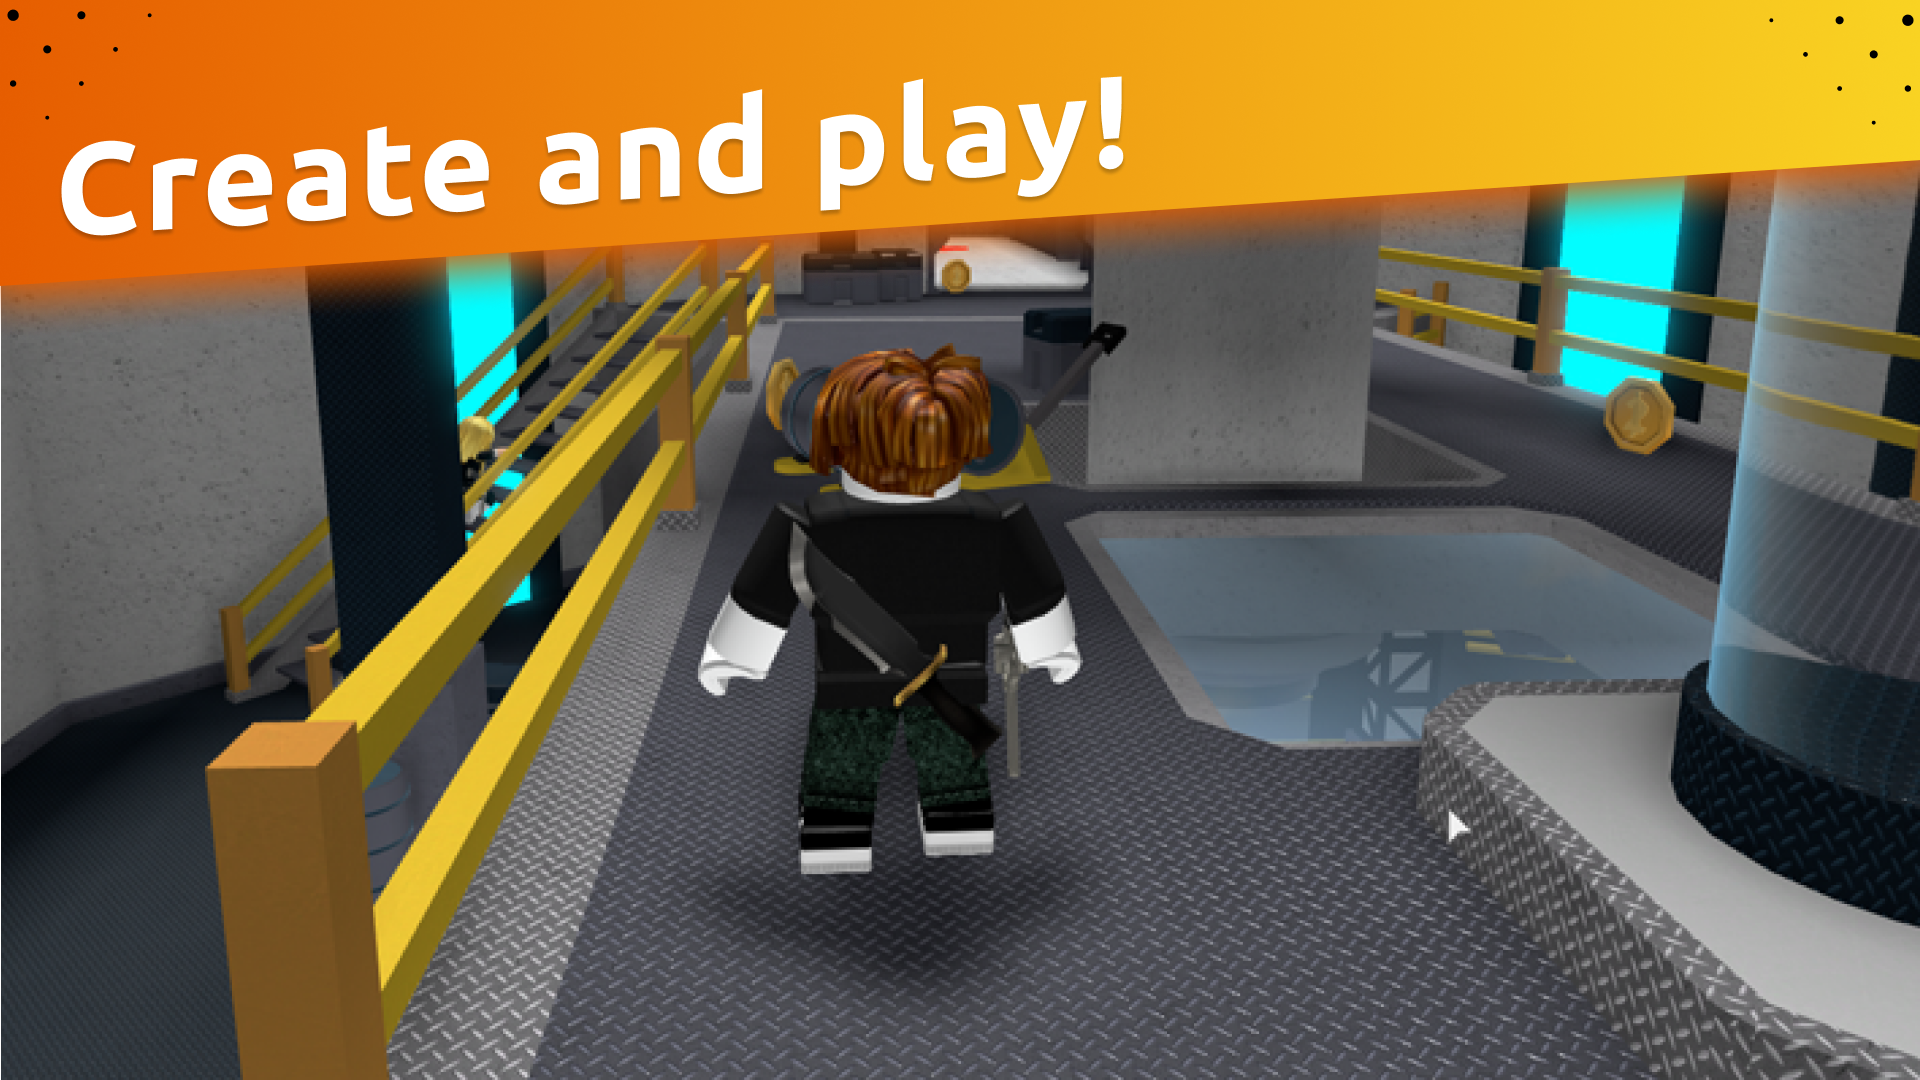 Download MOD-MASTER for Roblox APK